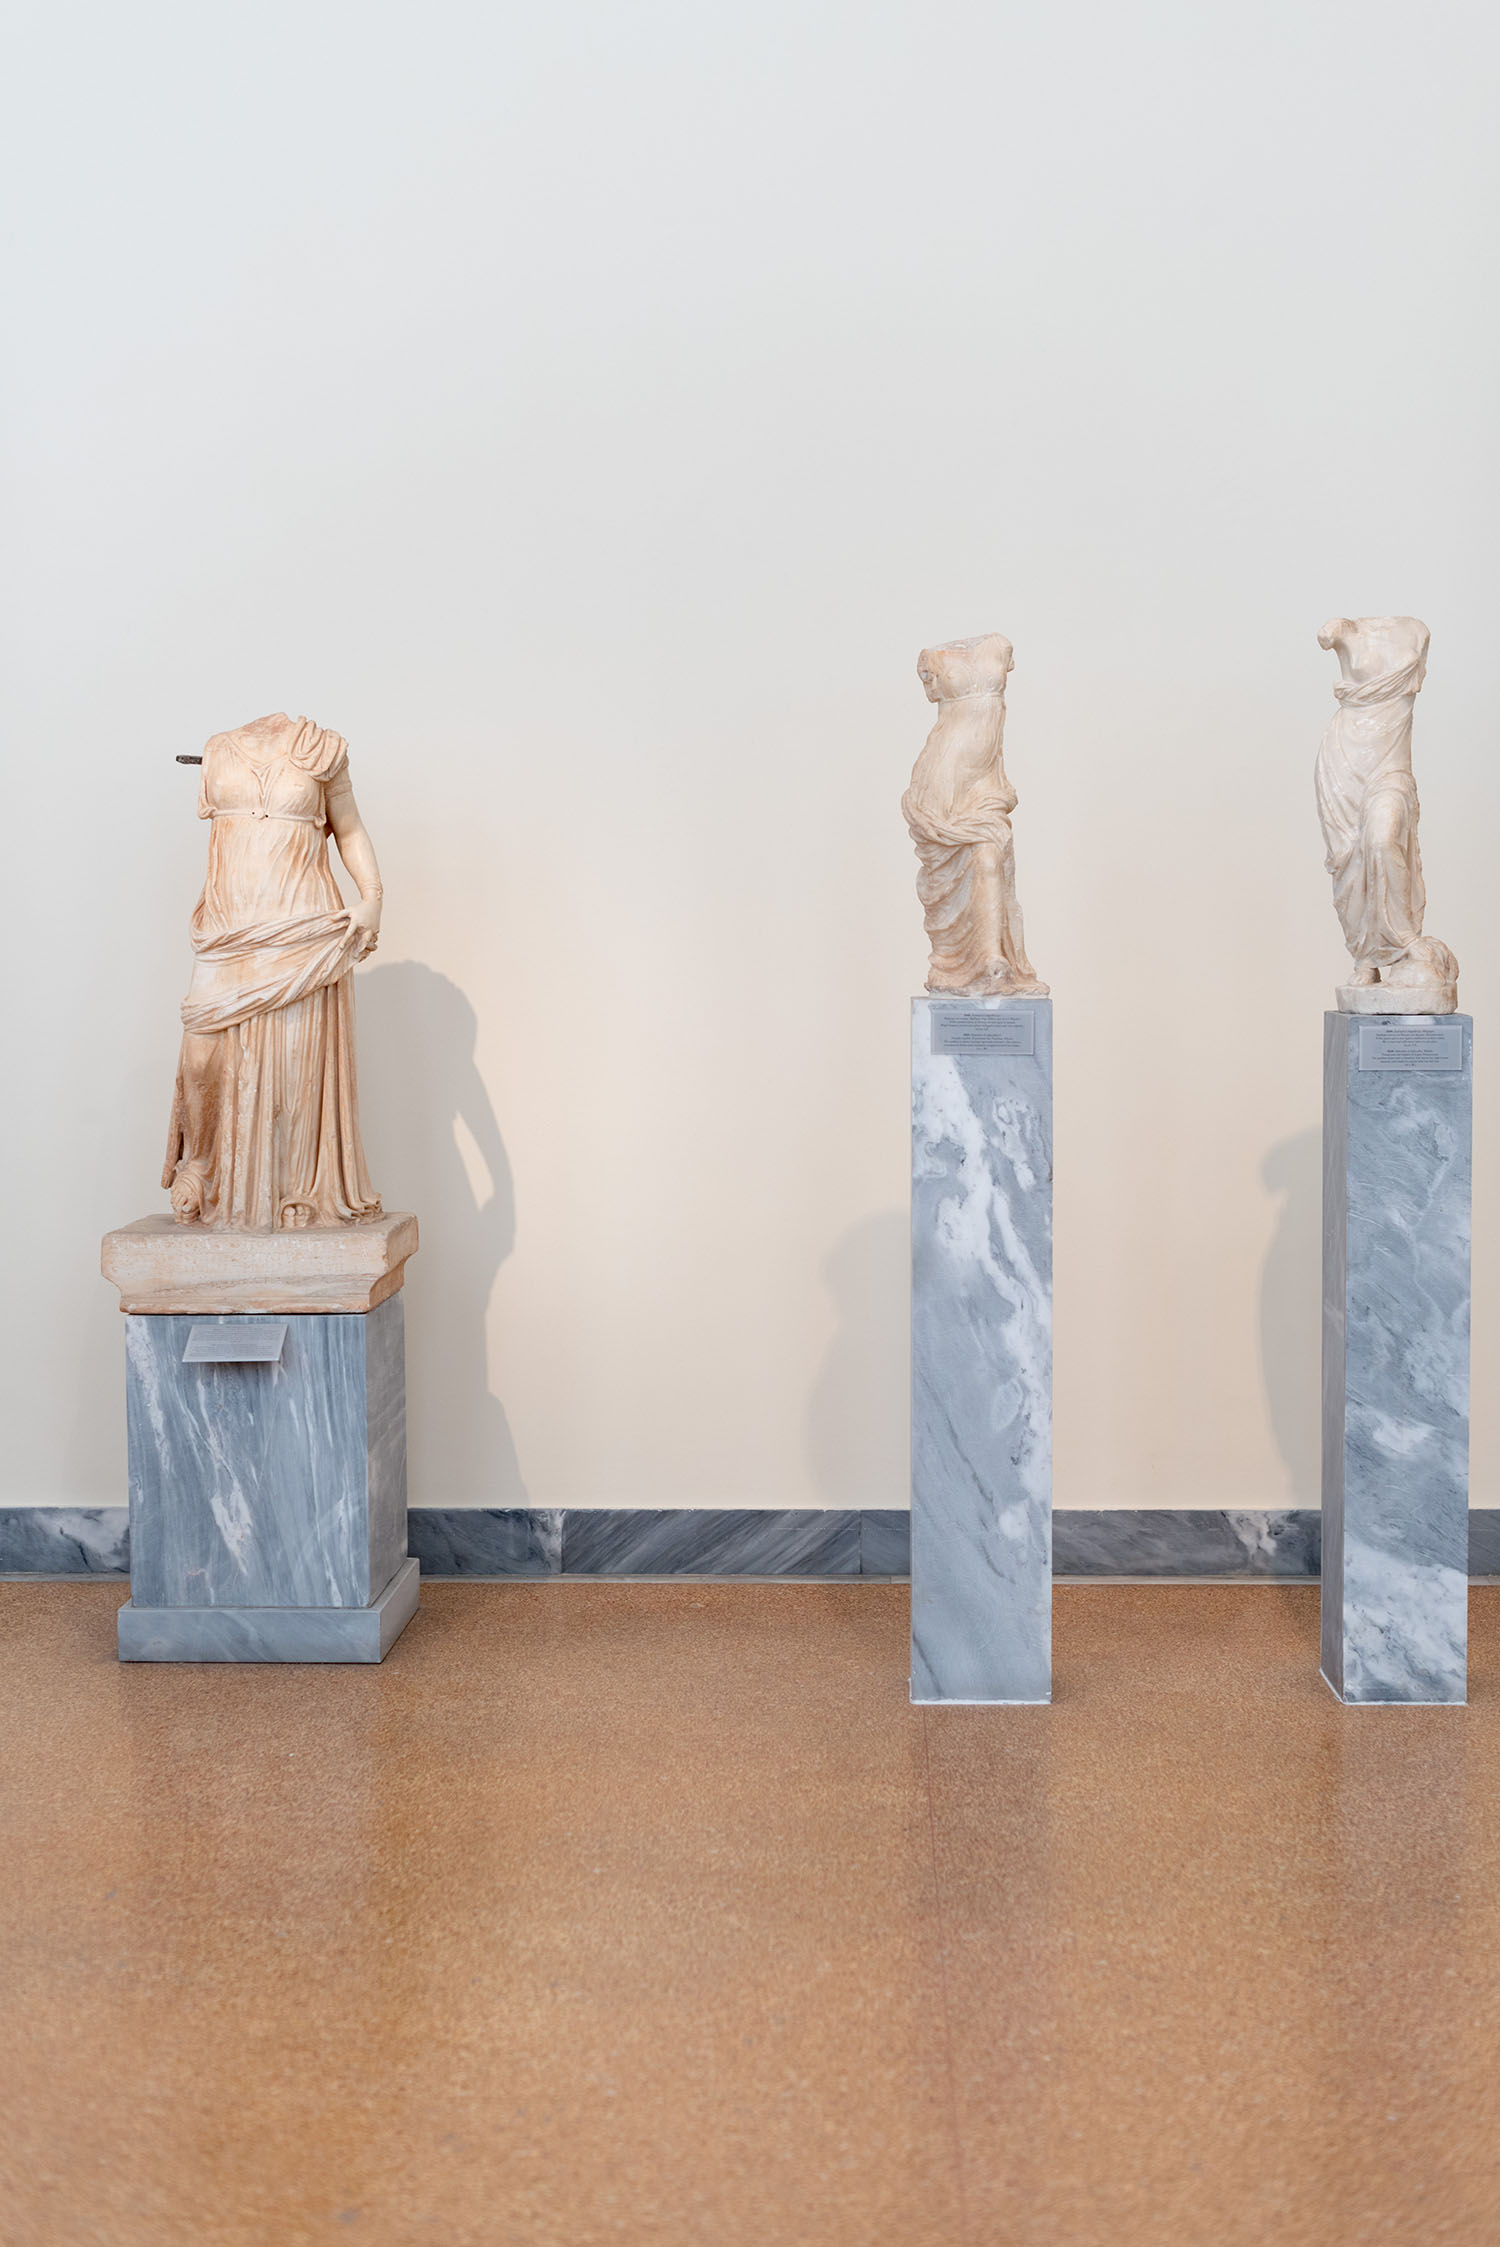 Coco & Vera - Marble statues at the National Archeological Museum in Athens